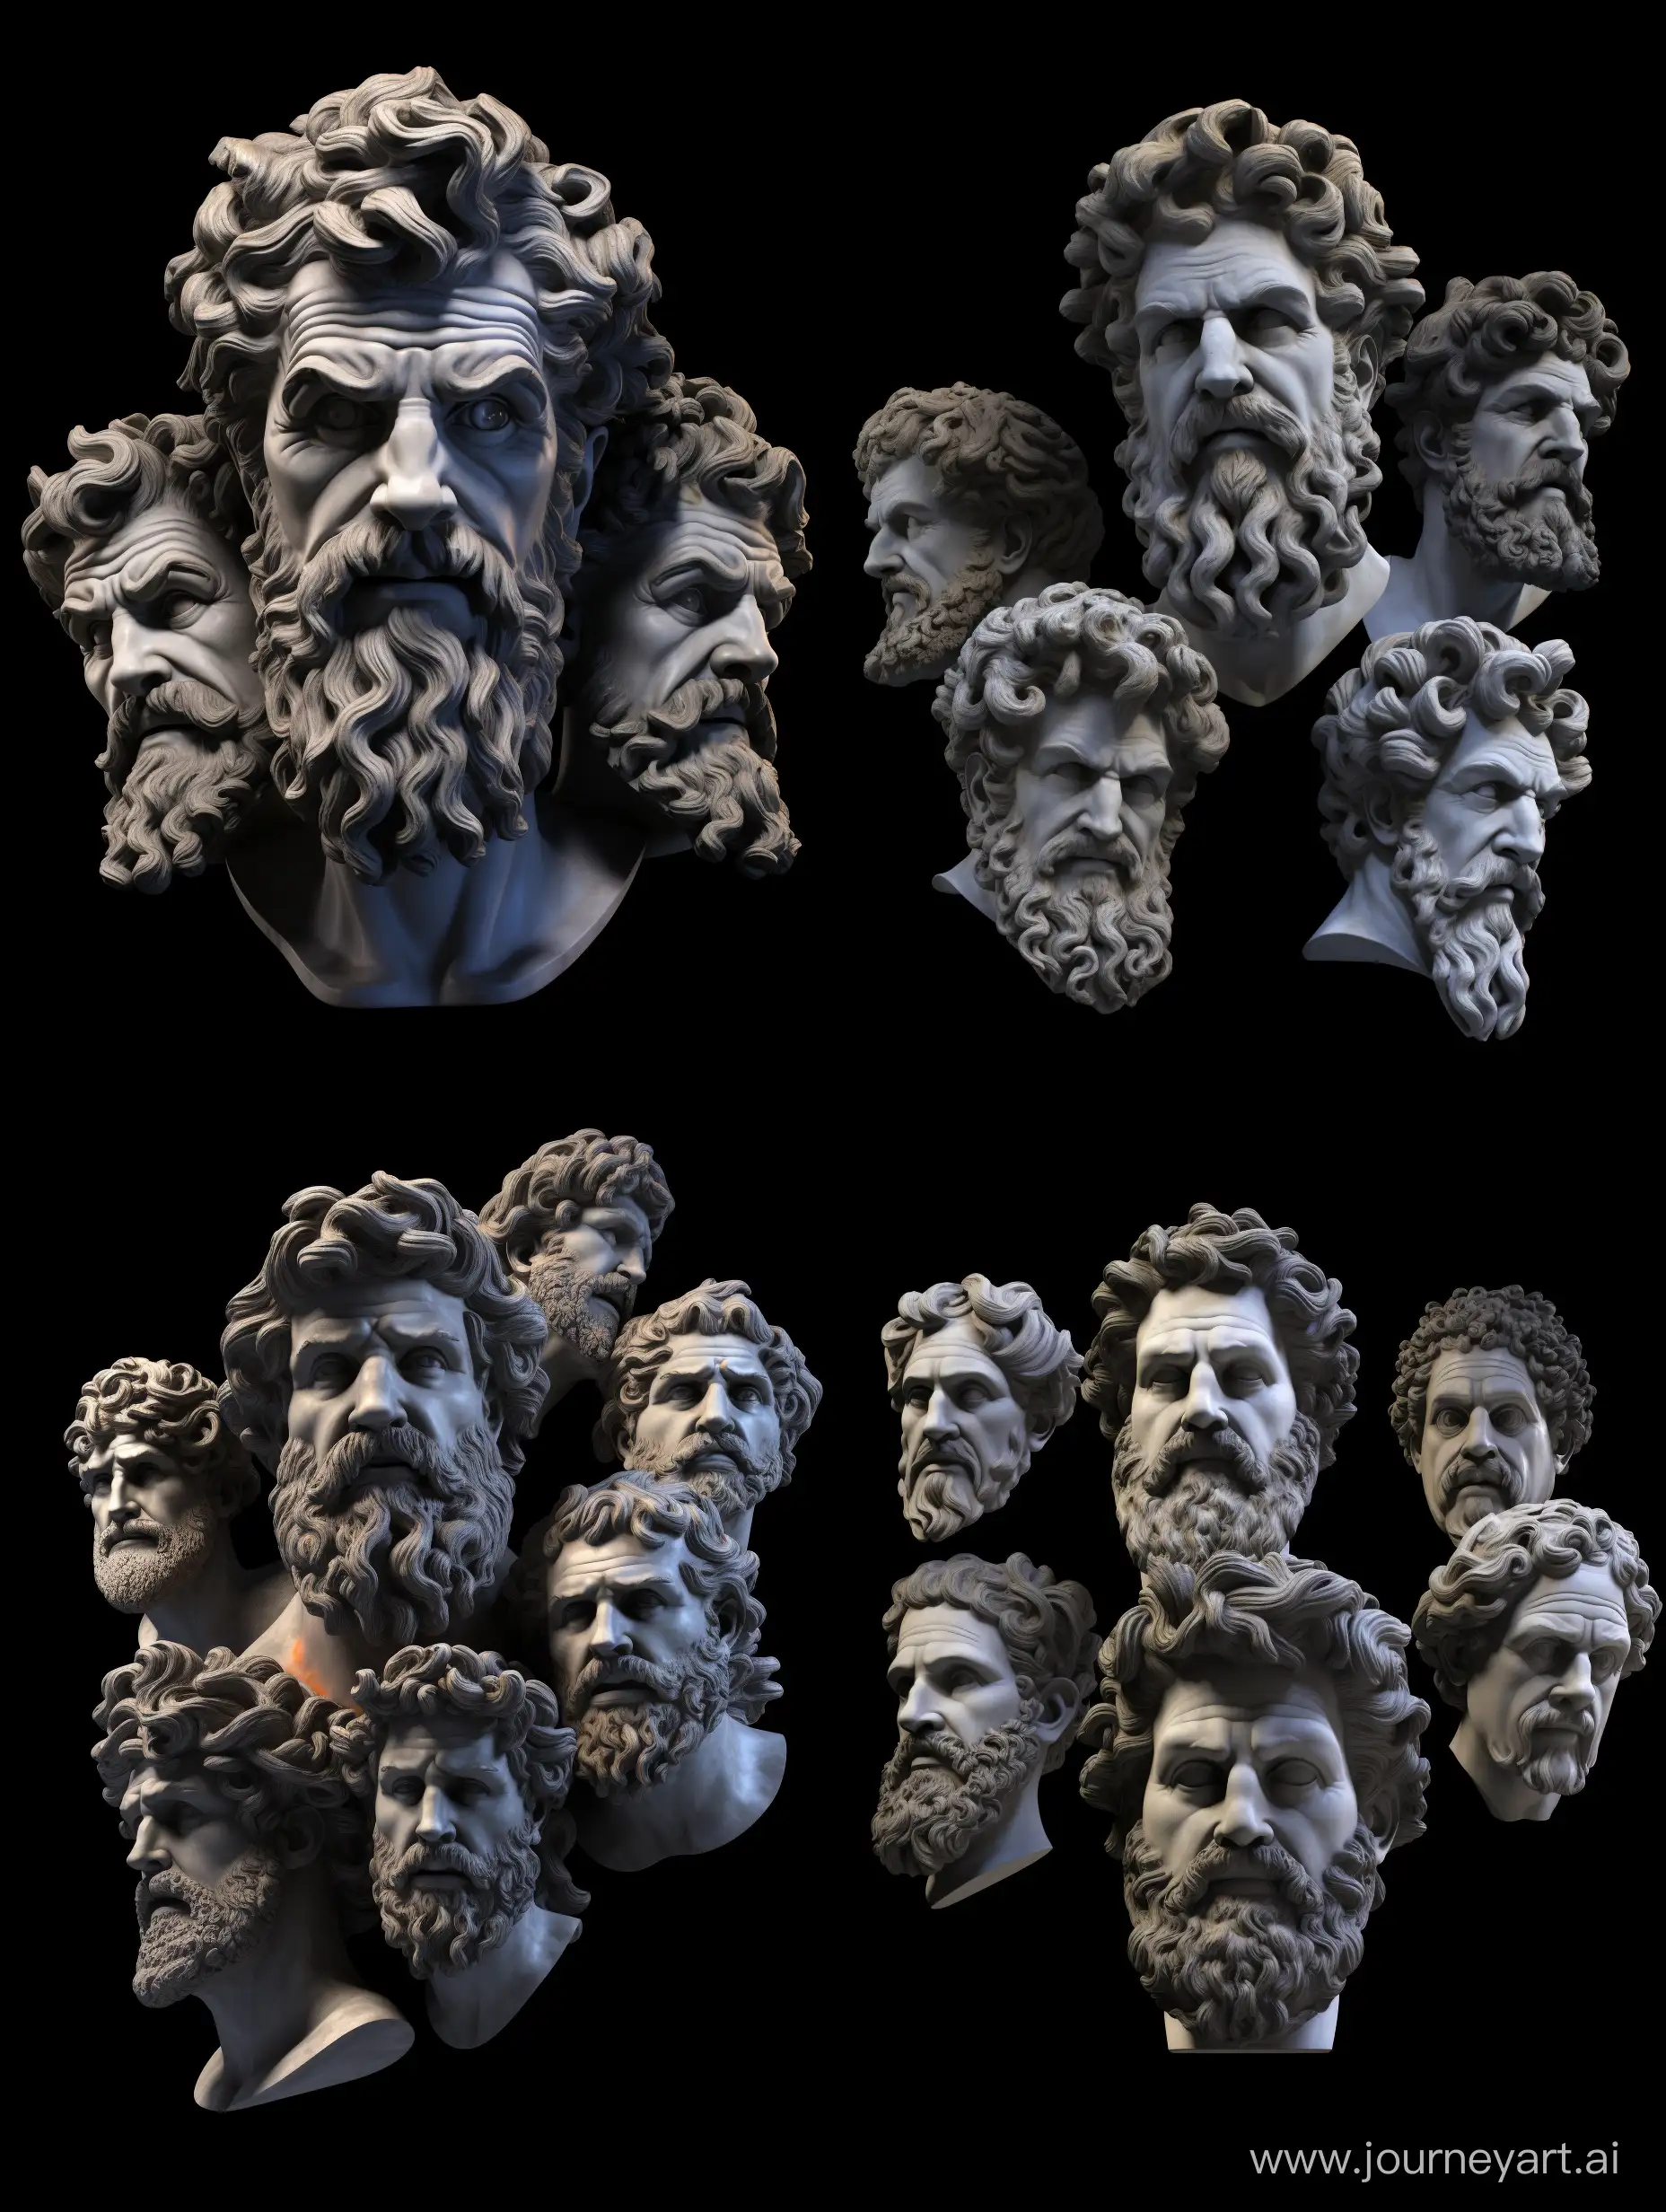 Generate a 8k resolution image of a collection of Stoic philosophy statue heads, with a black background and ultra-realistic portrayal. Ensure the image is centered on the canvas. The artwork should feature a mix of ancient Greek and Roman Stoic philosophers, with a focus on their wisdom and intellectual prowess. Incorporate elements of Stoic philosophy, such as the virtues, the four cardinal virtues, and the golden mean, to create a visually striking and meaningful composition, relistic, cinematic lighting, --ar 3:4 --q 2